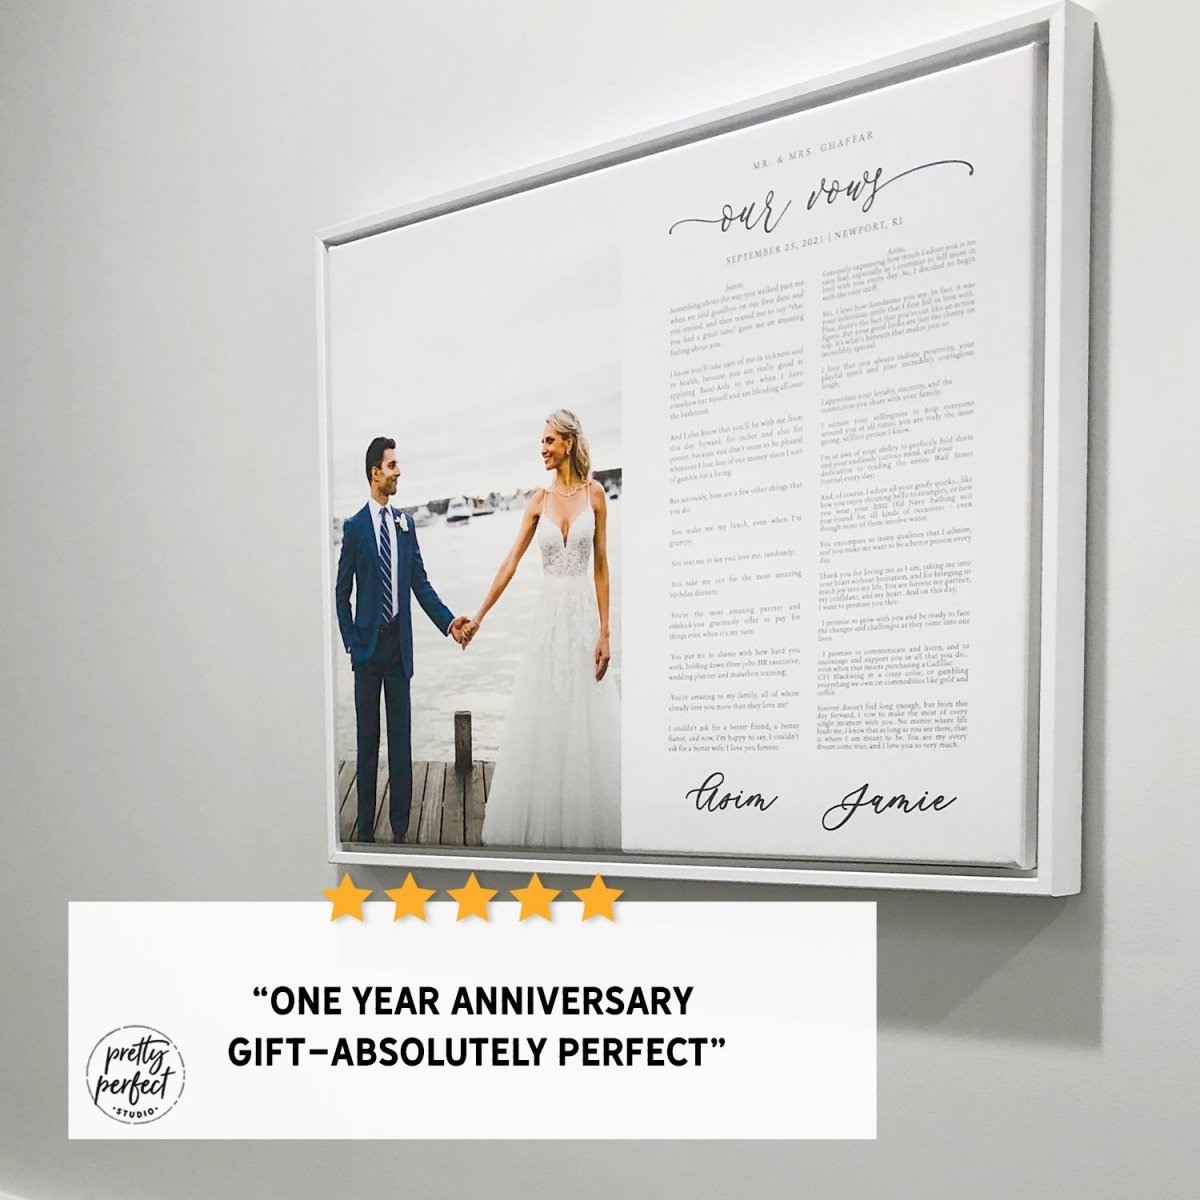 Customer product review for personalized wedding vows sign by Pretty Perfect Studio